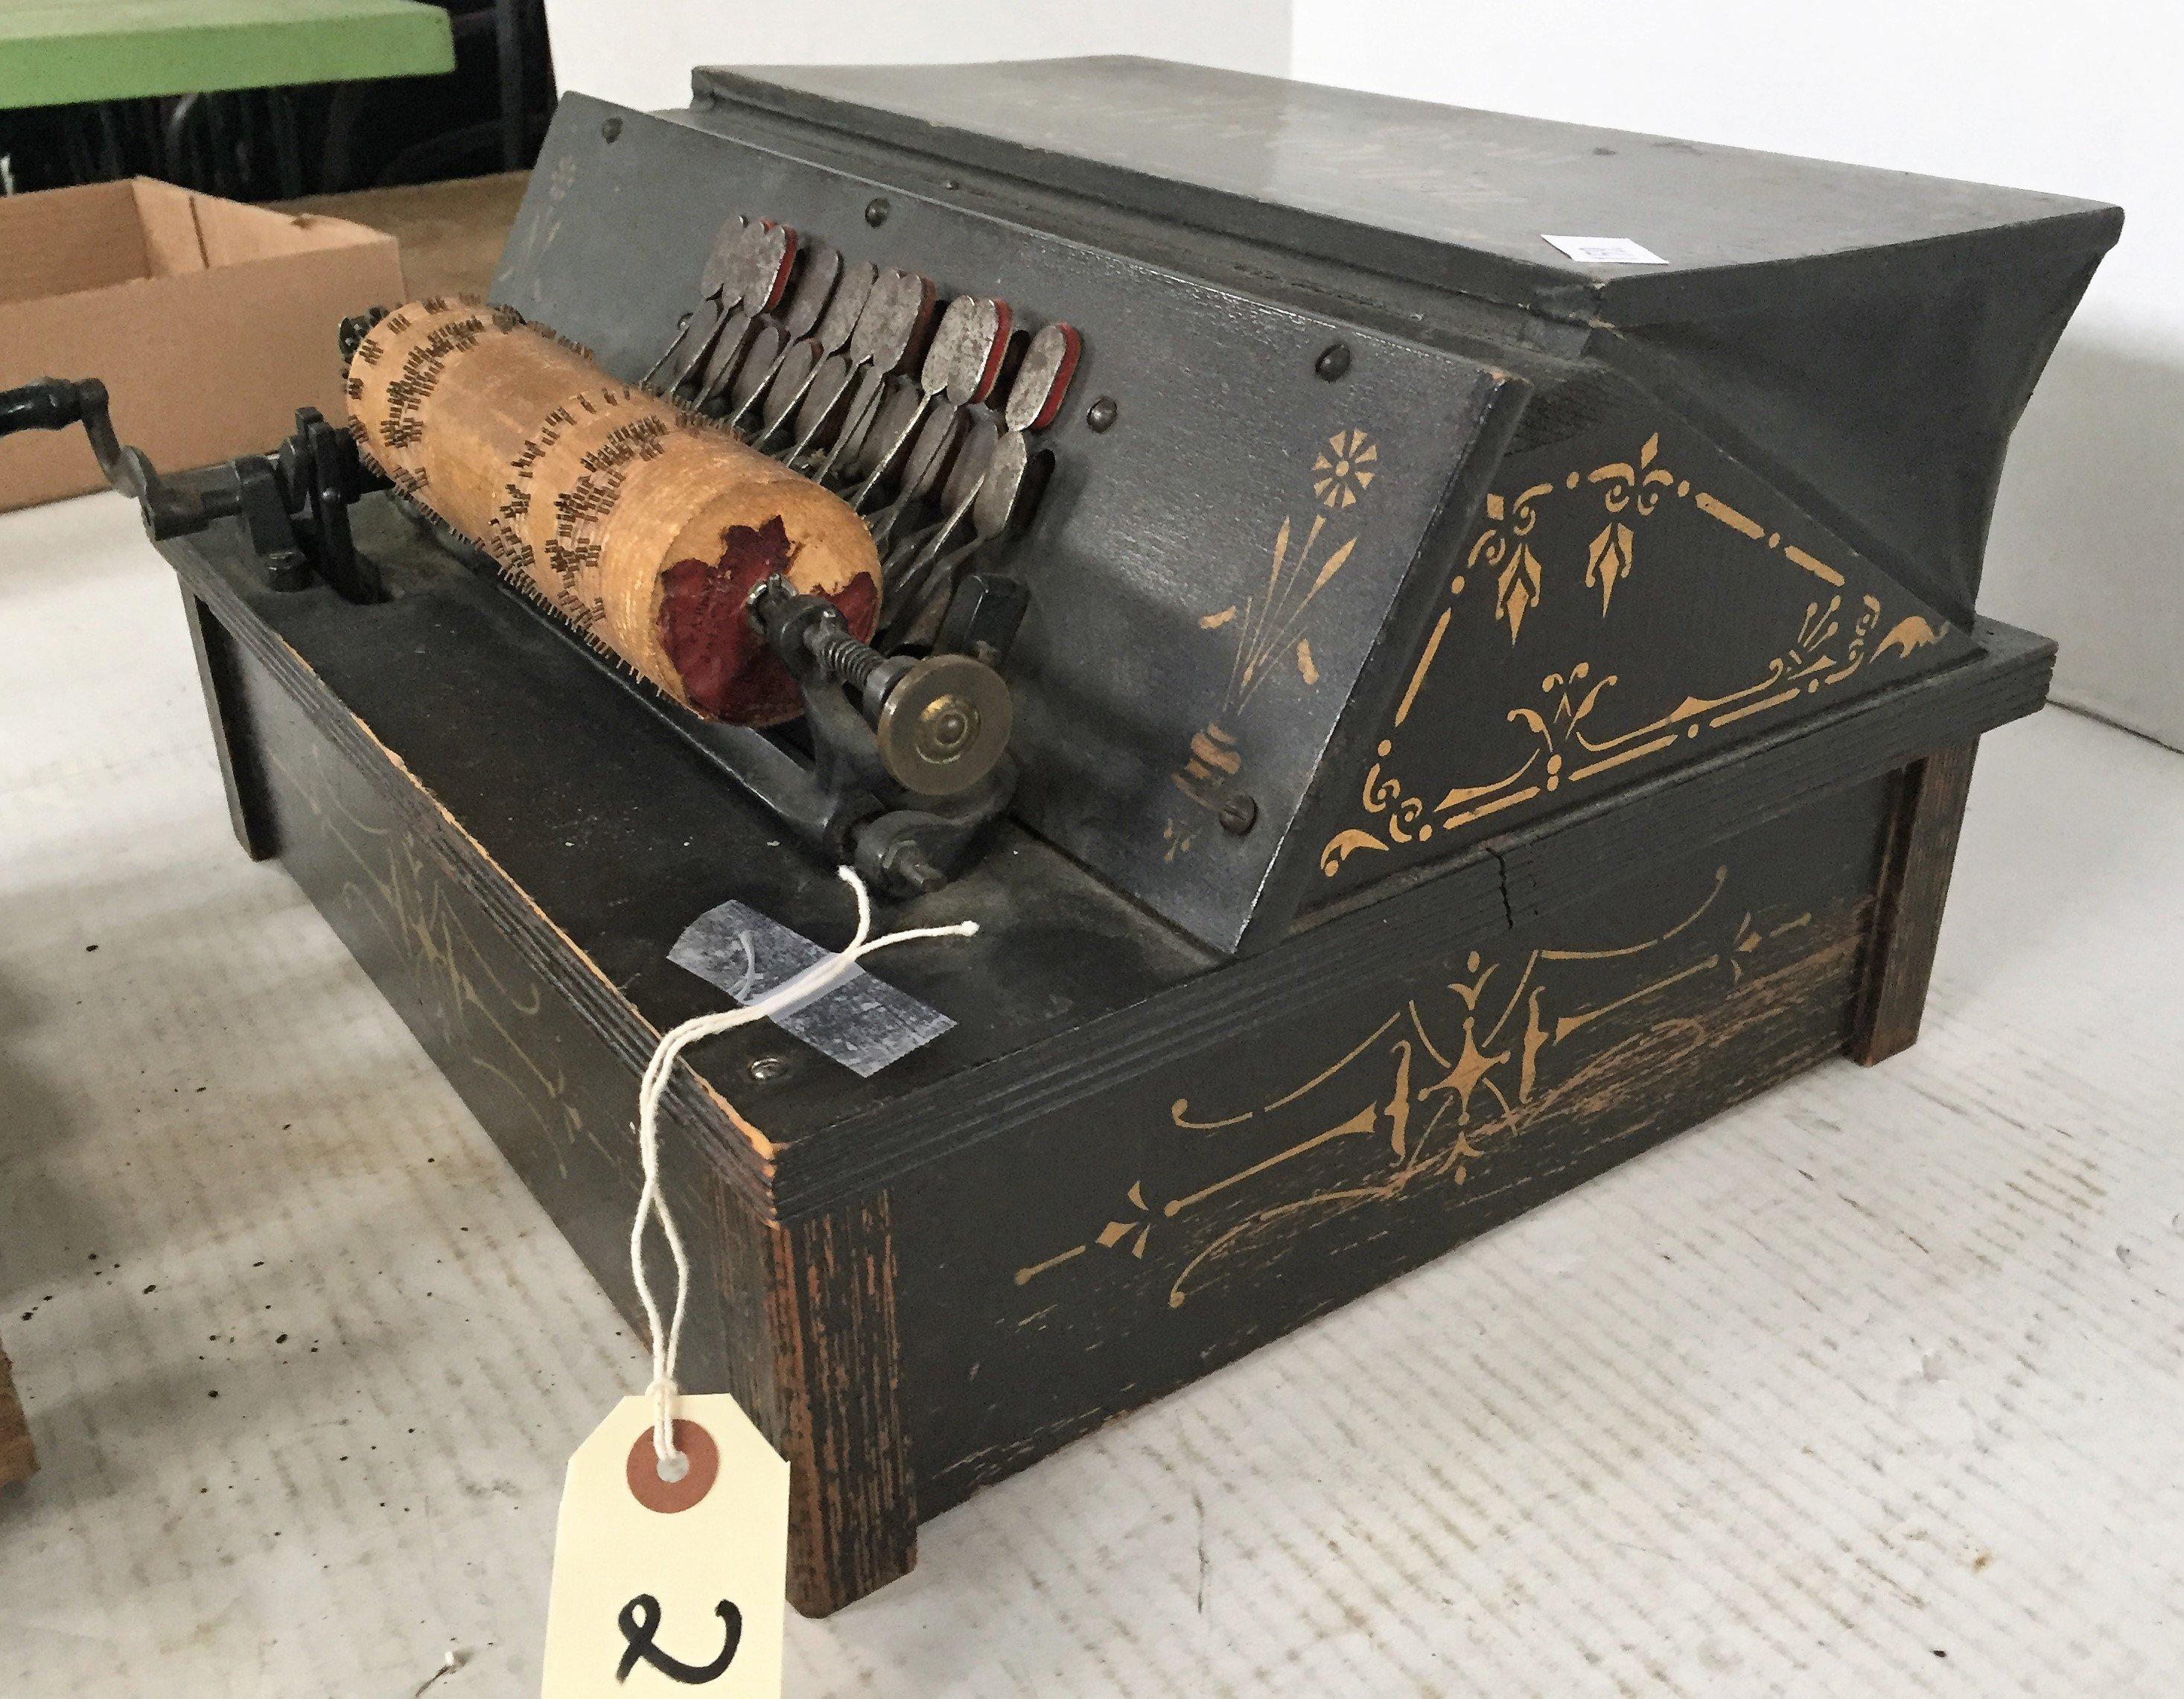 EARLY PRIMITIVE "THE GEM ROLLER ORGAN" COMES W/6 ROLLERS.